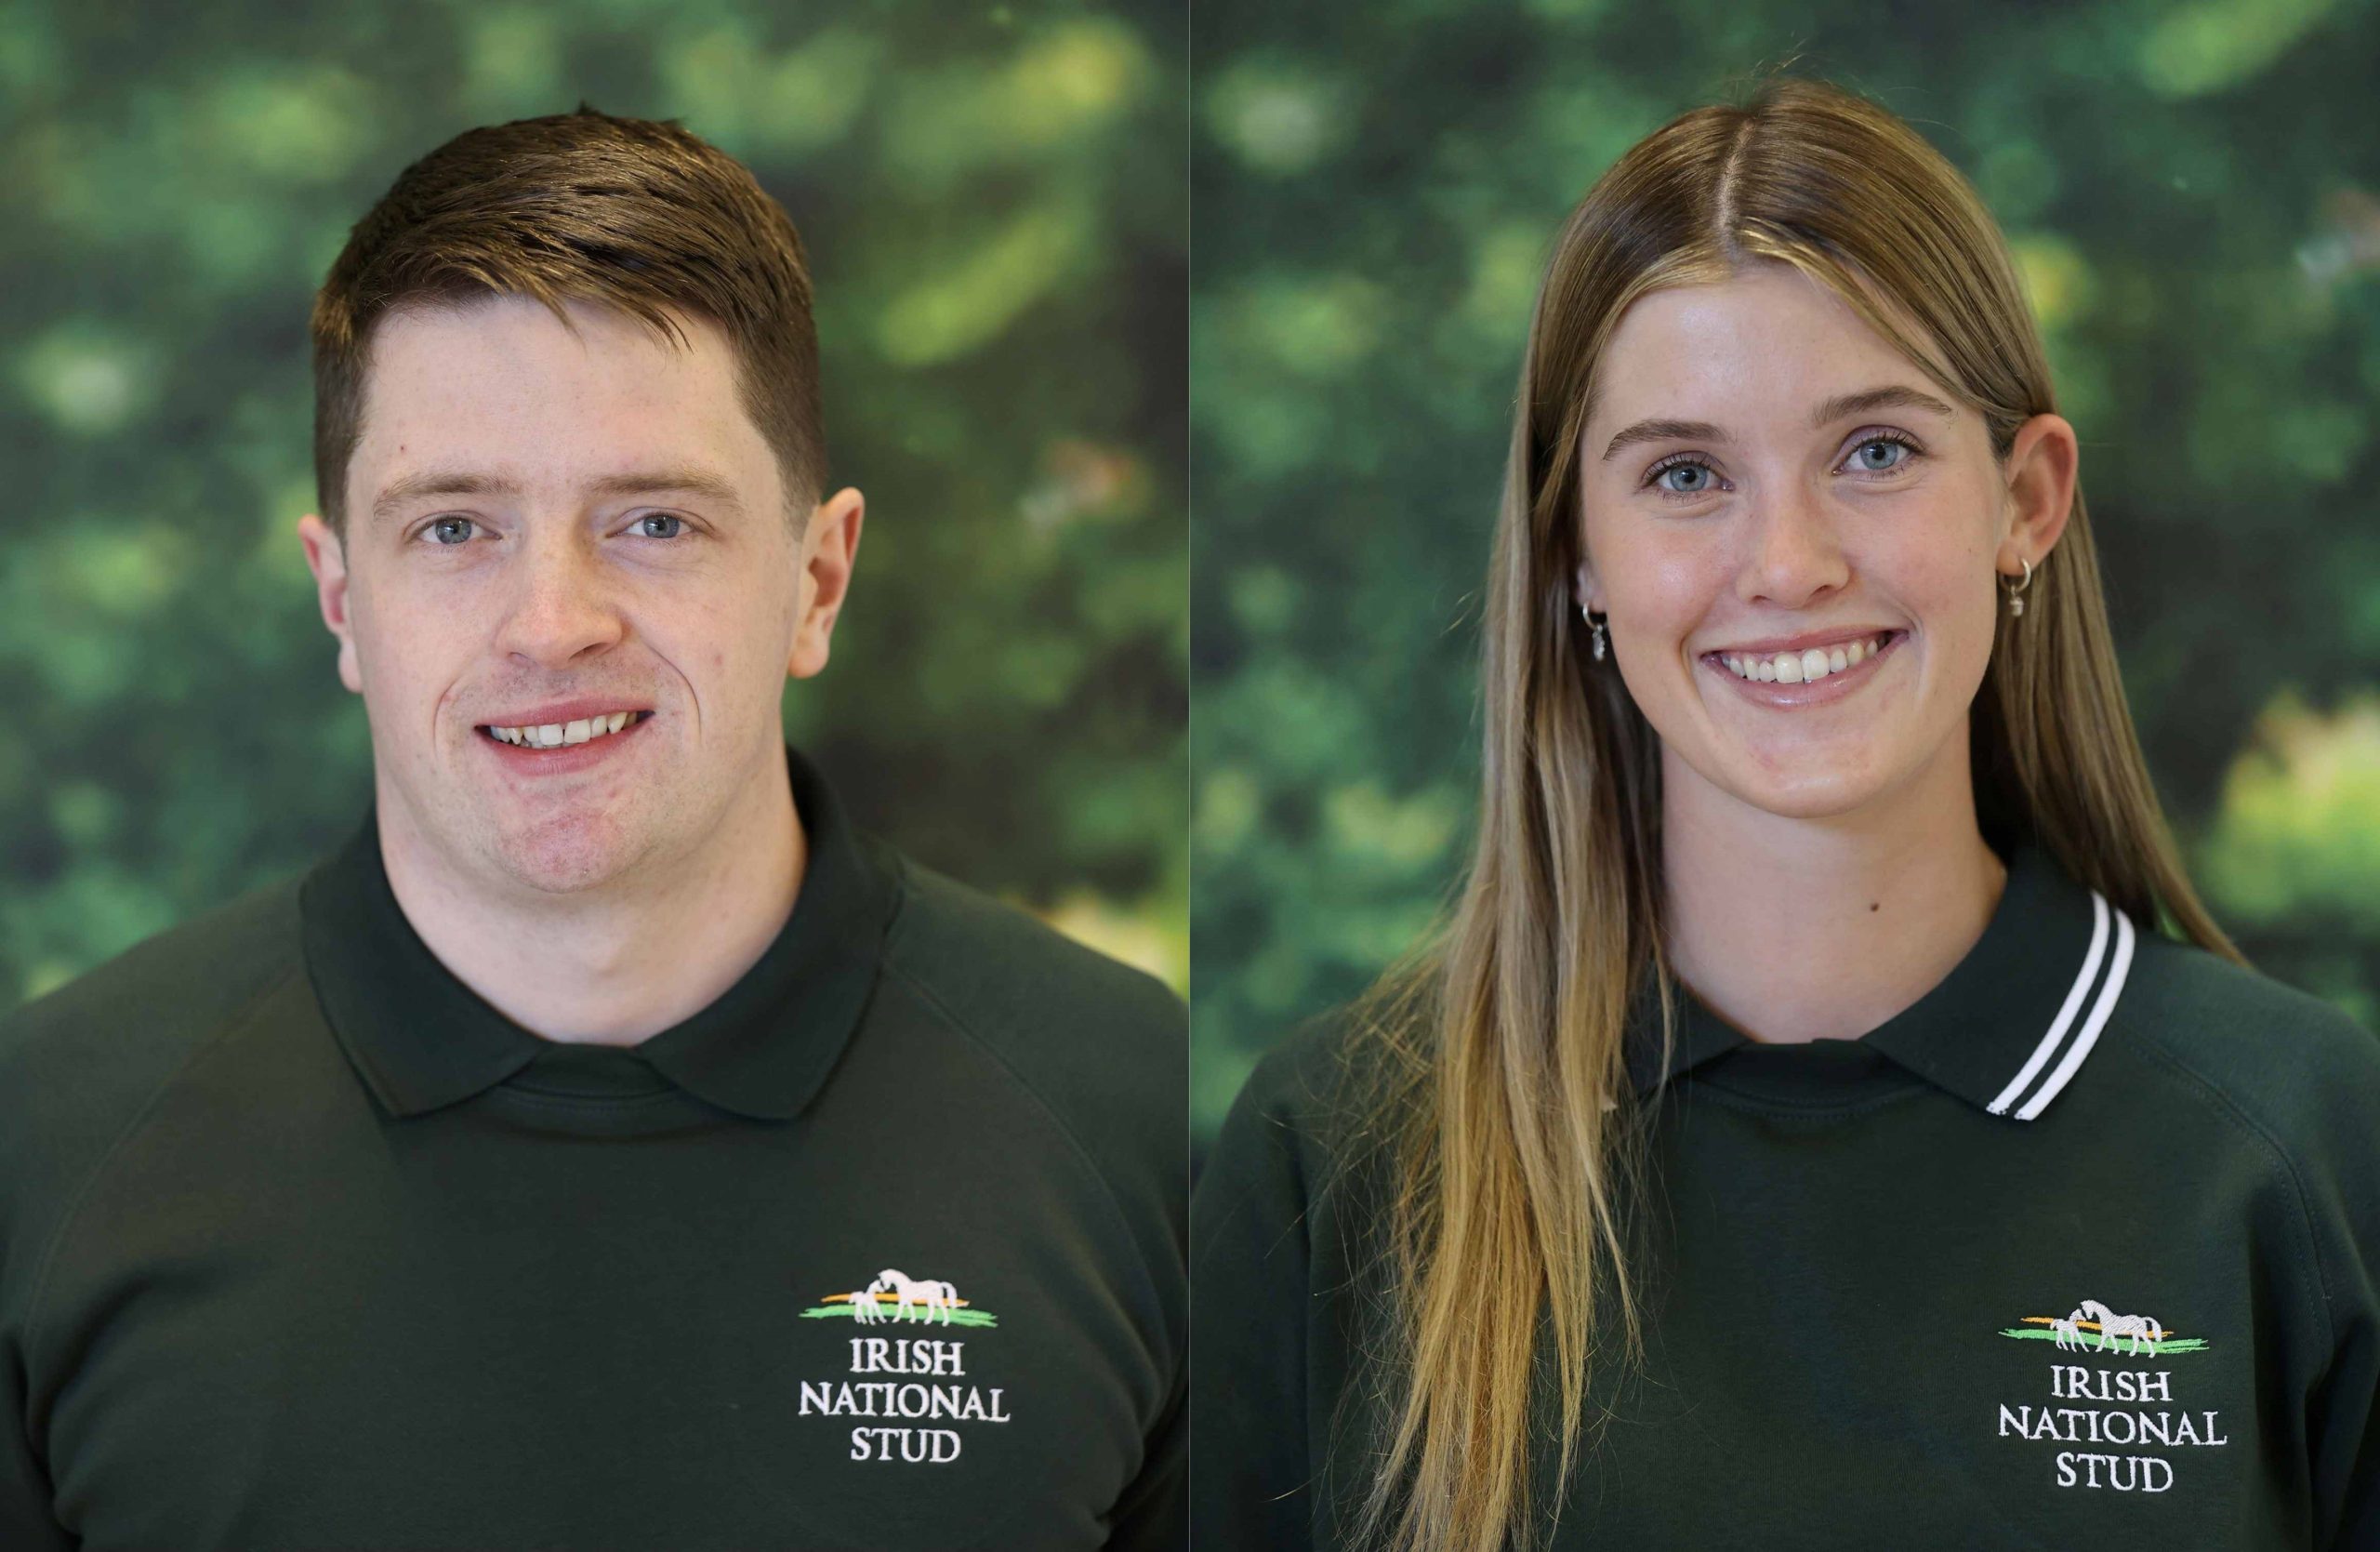 Student Blog from Mikey Cooke (IRE) and Alice Wilkinson (NZ)